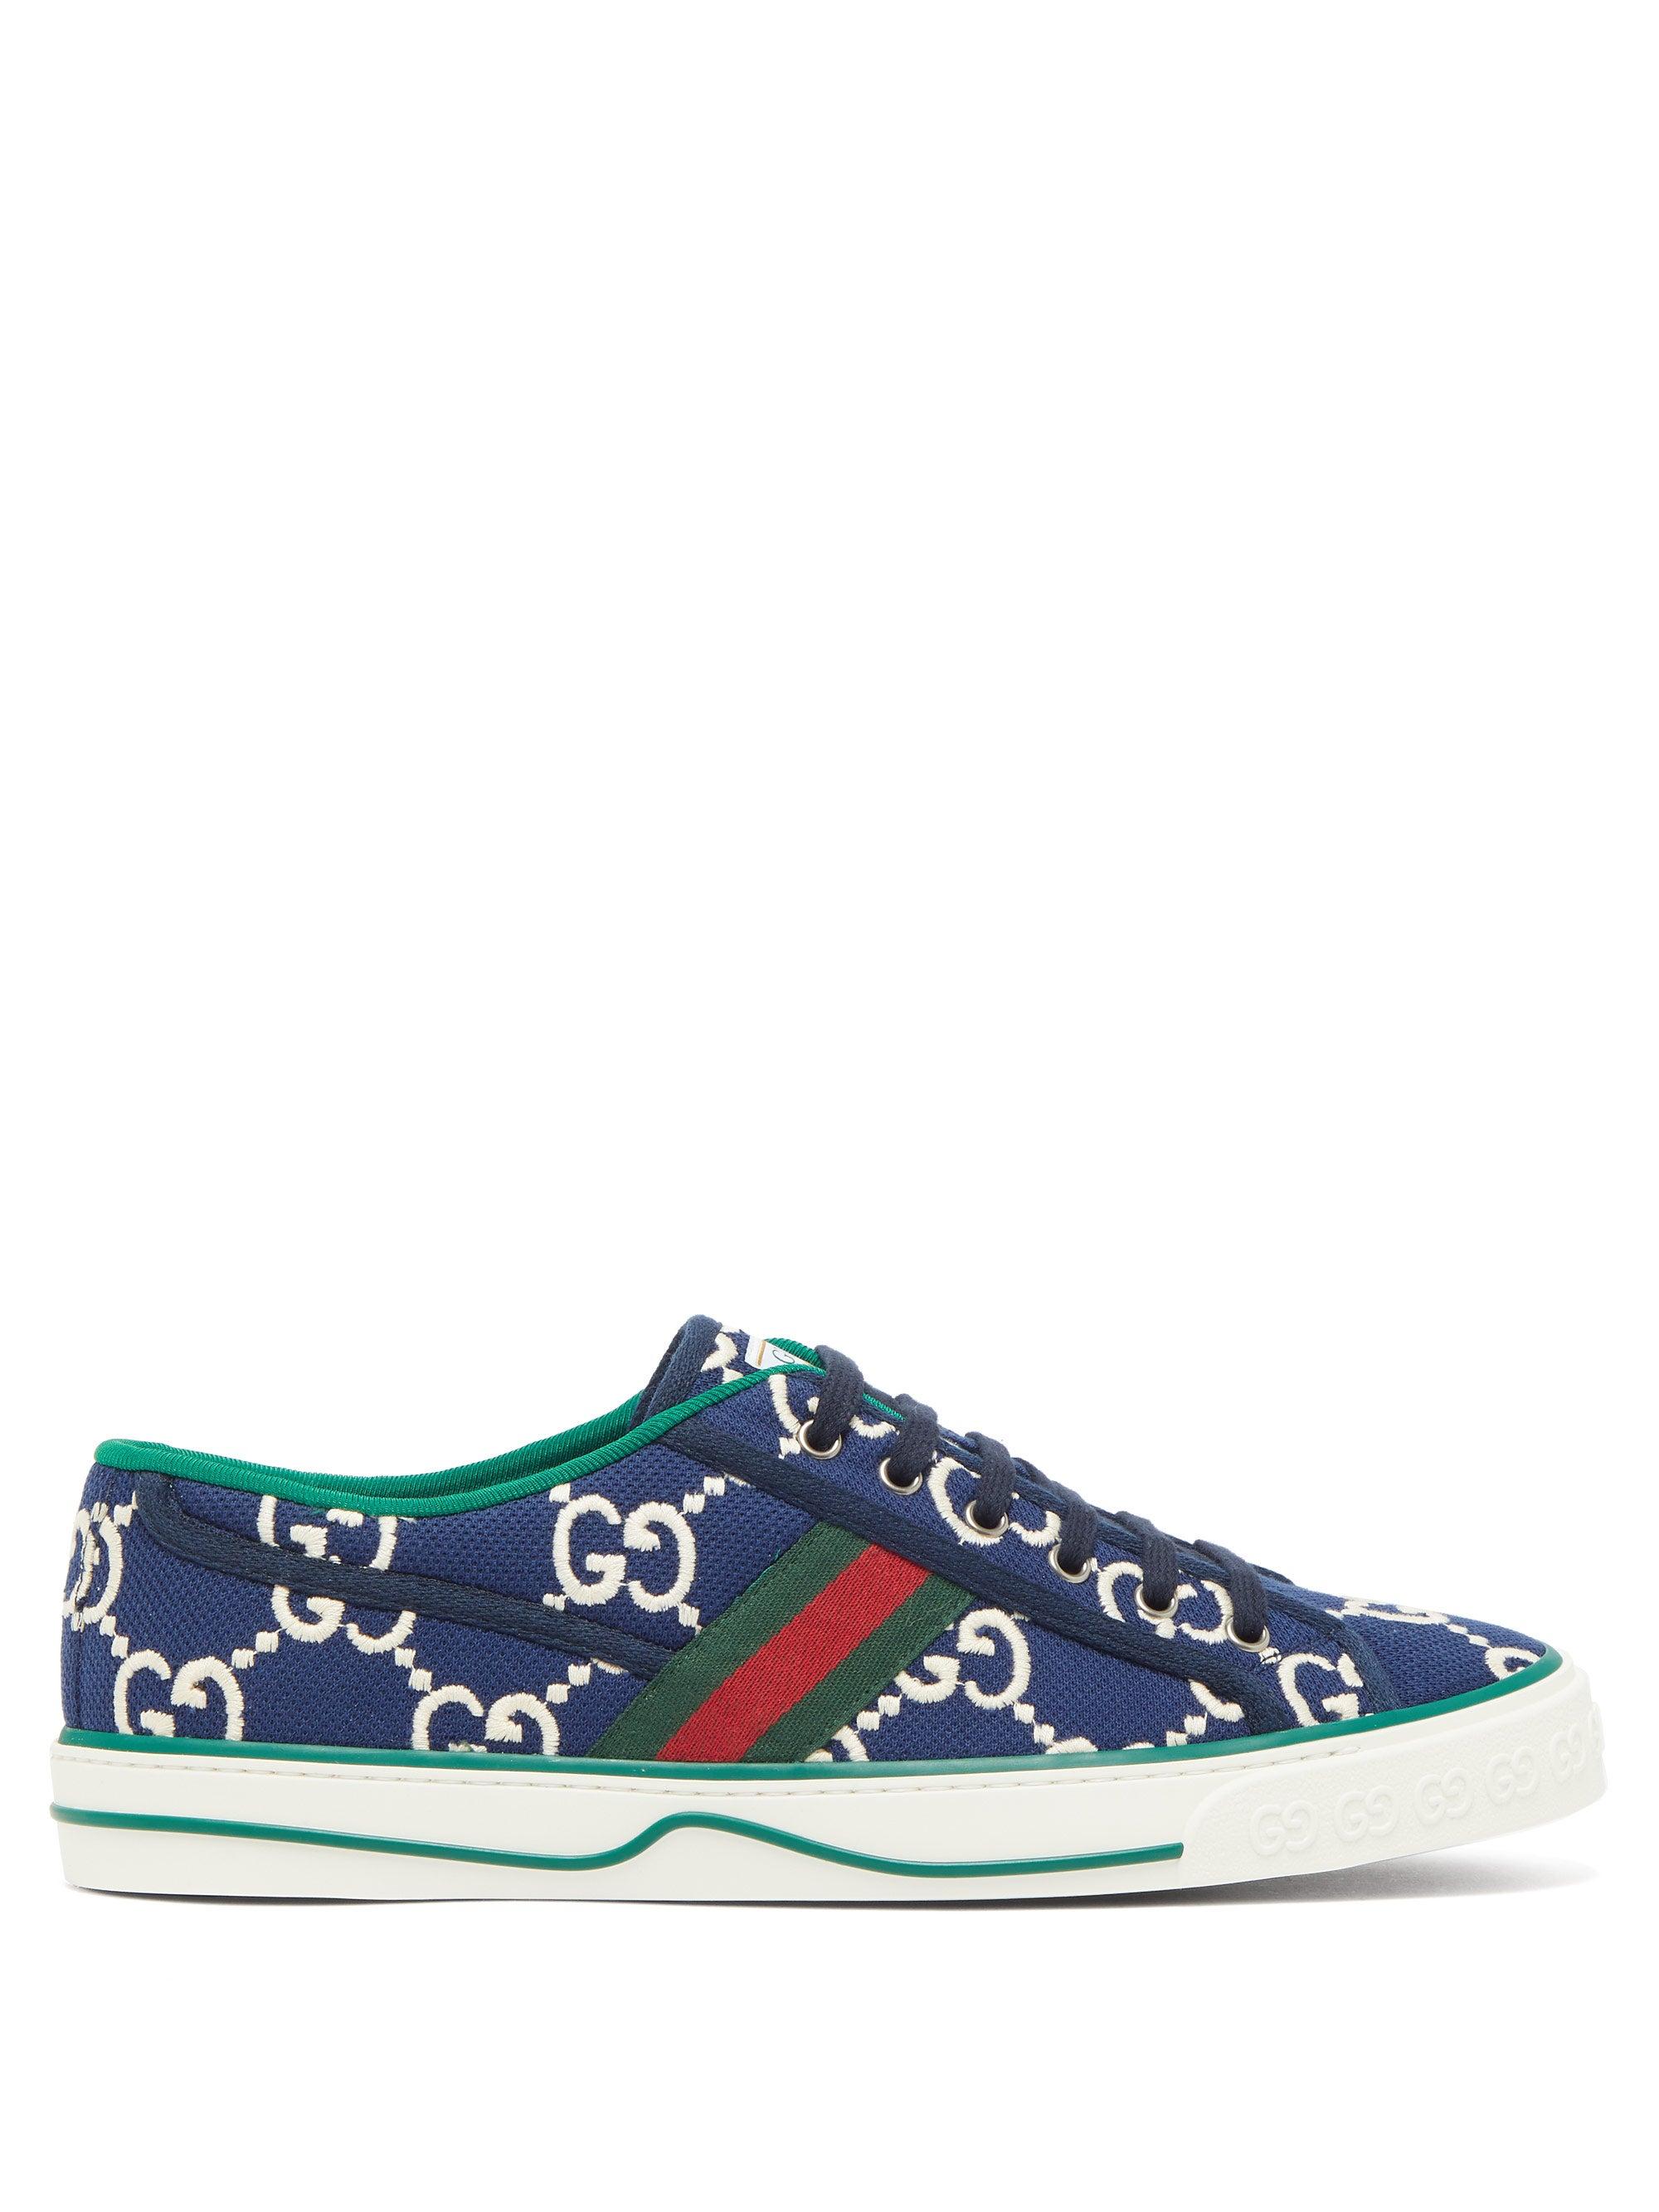 gucci sneakers red and blue